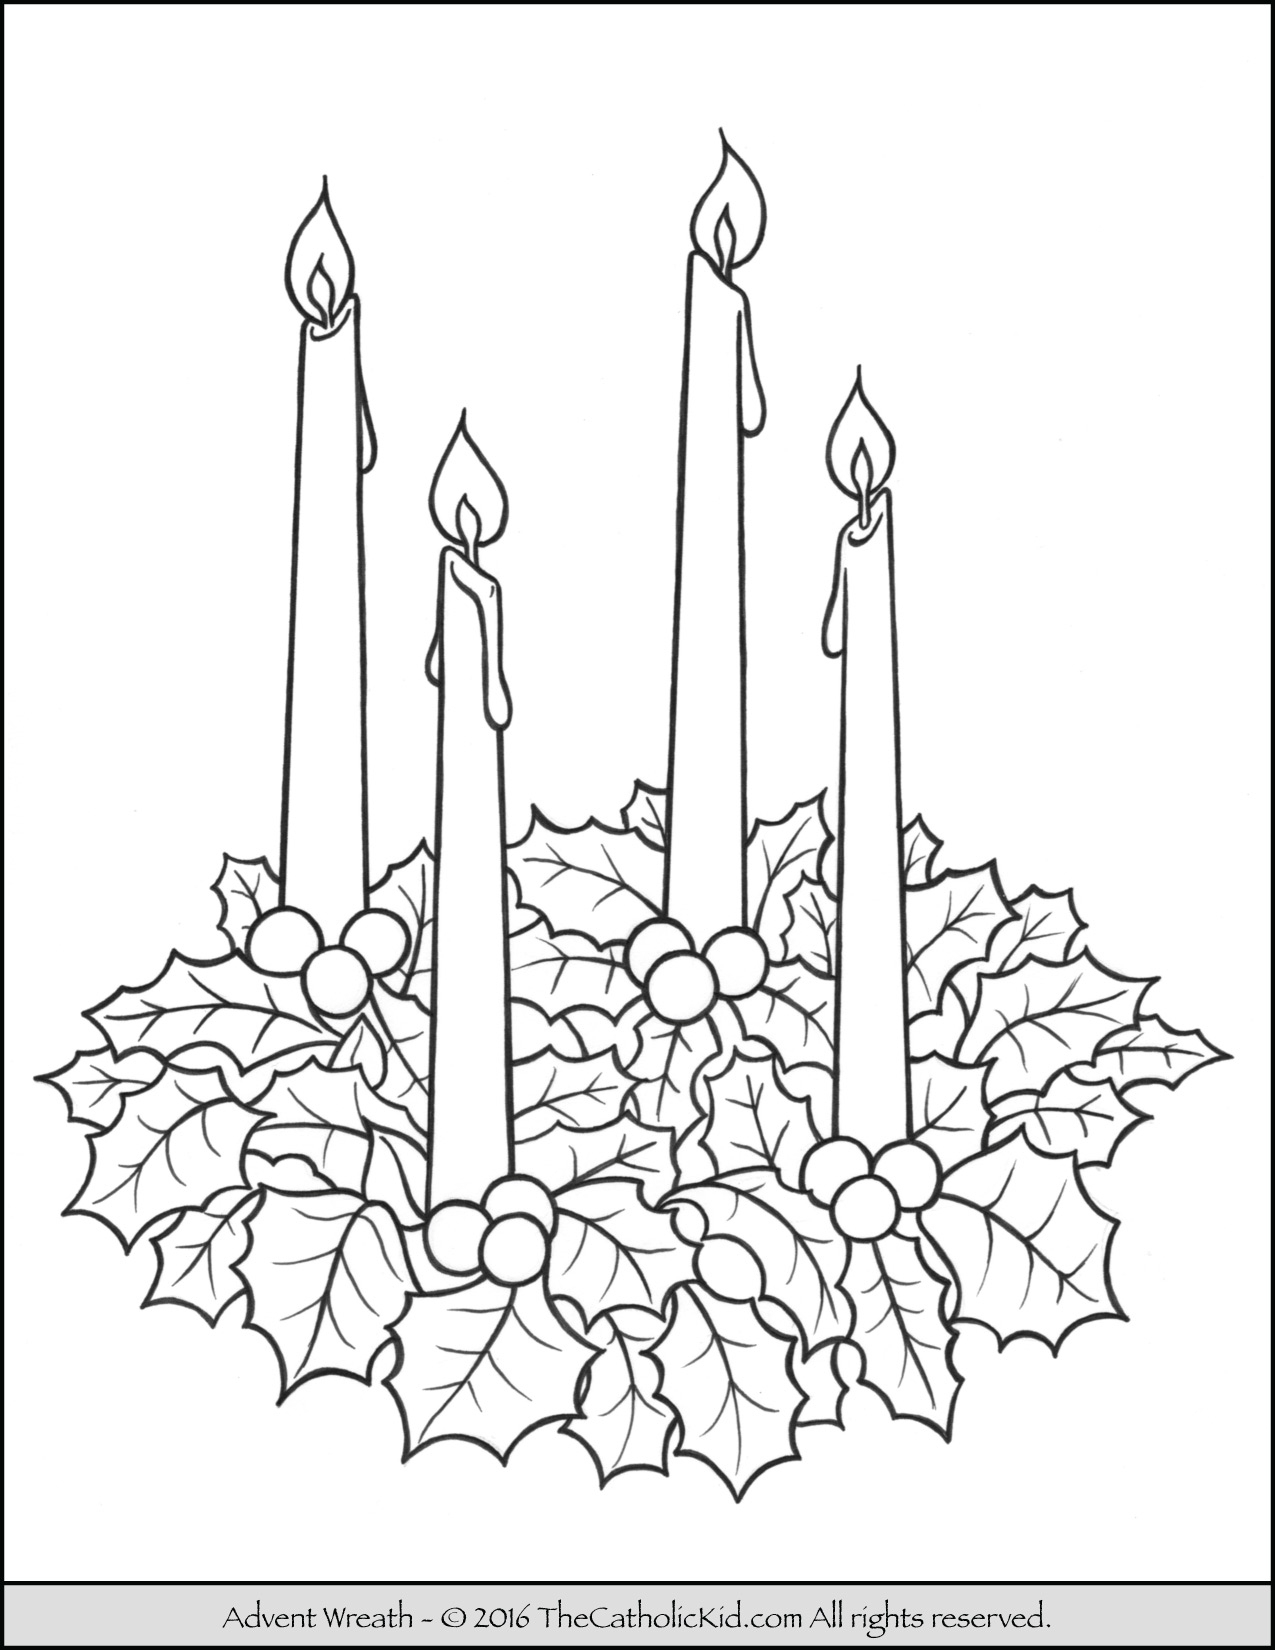 Advent Wreath Coloring Page - - Free Printable Advent Wreath